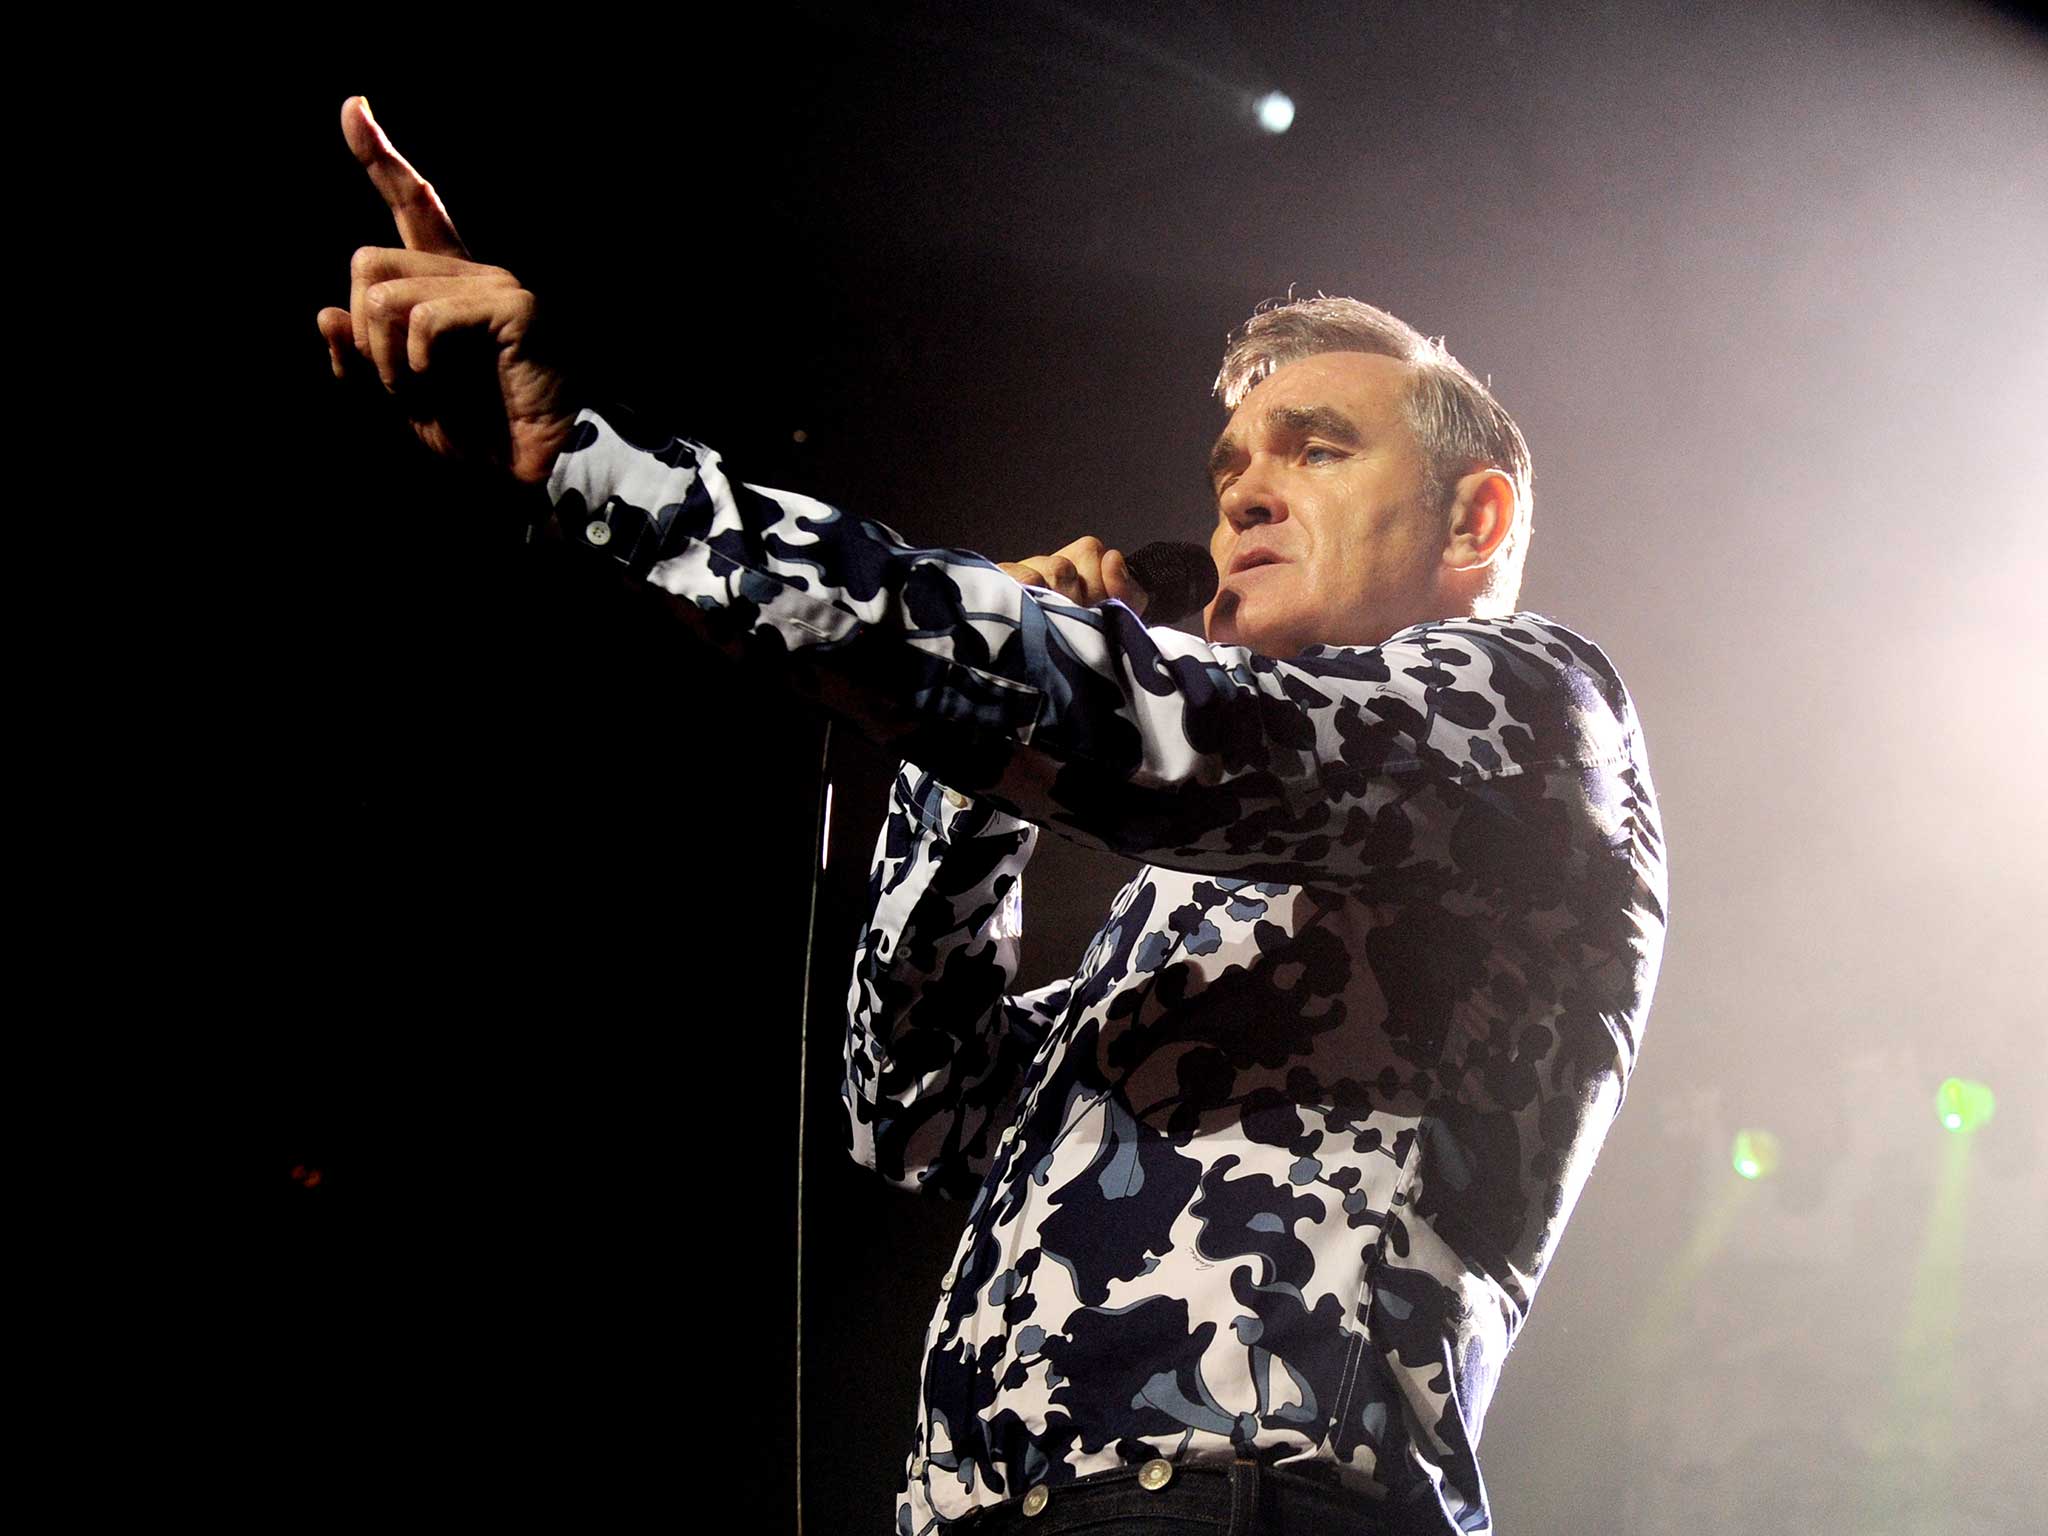 Morrissey is well-known for his animal rights activism, controversially suggesting last year that eating meat was similar to paedophilia